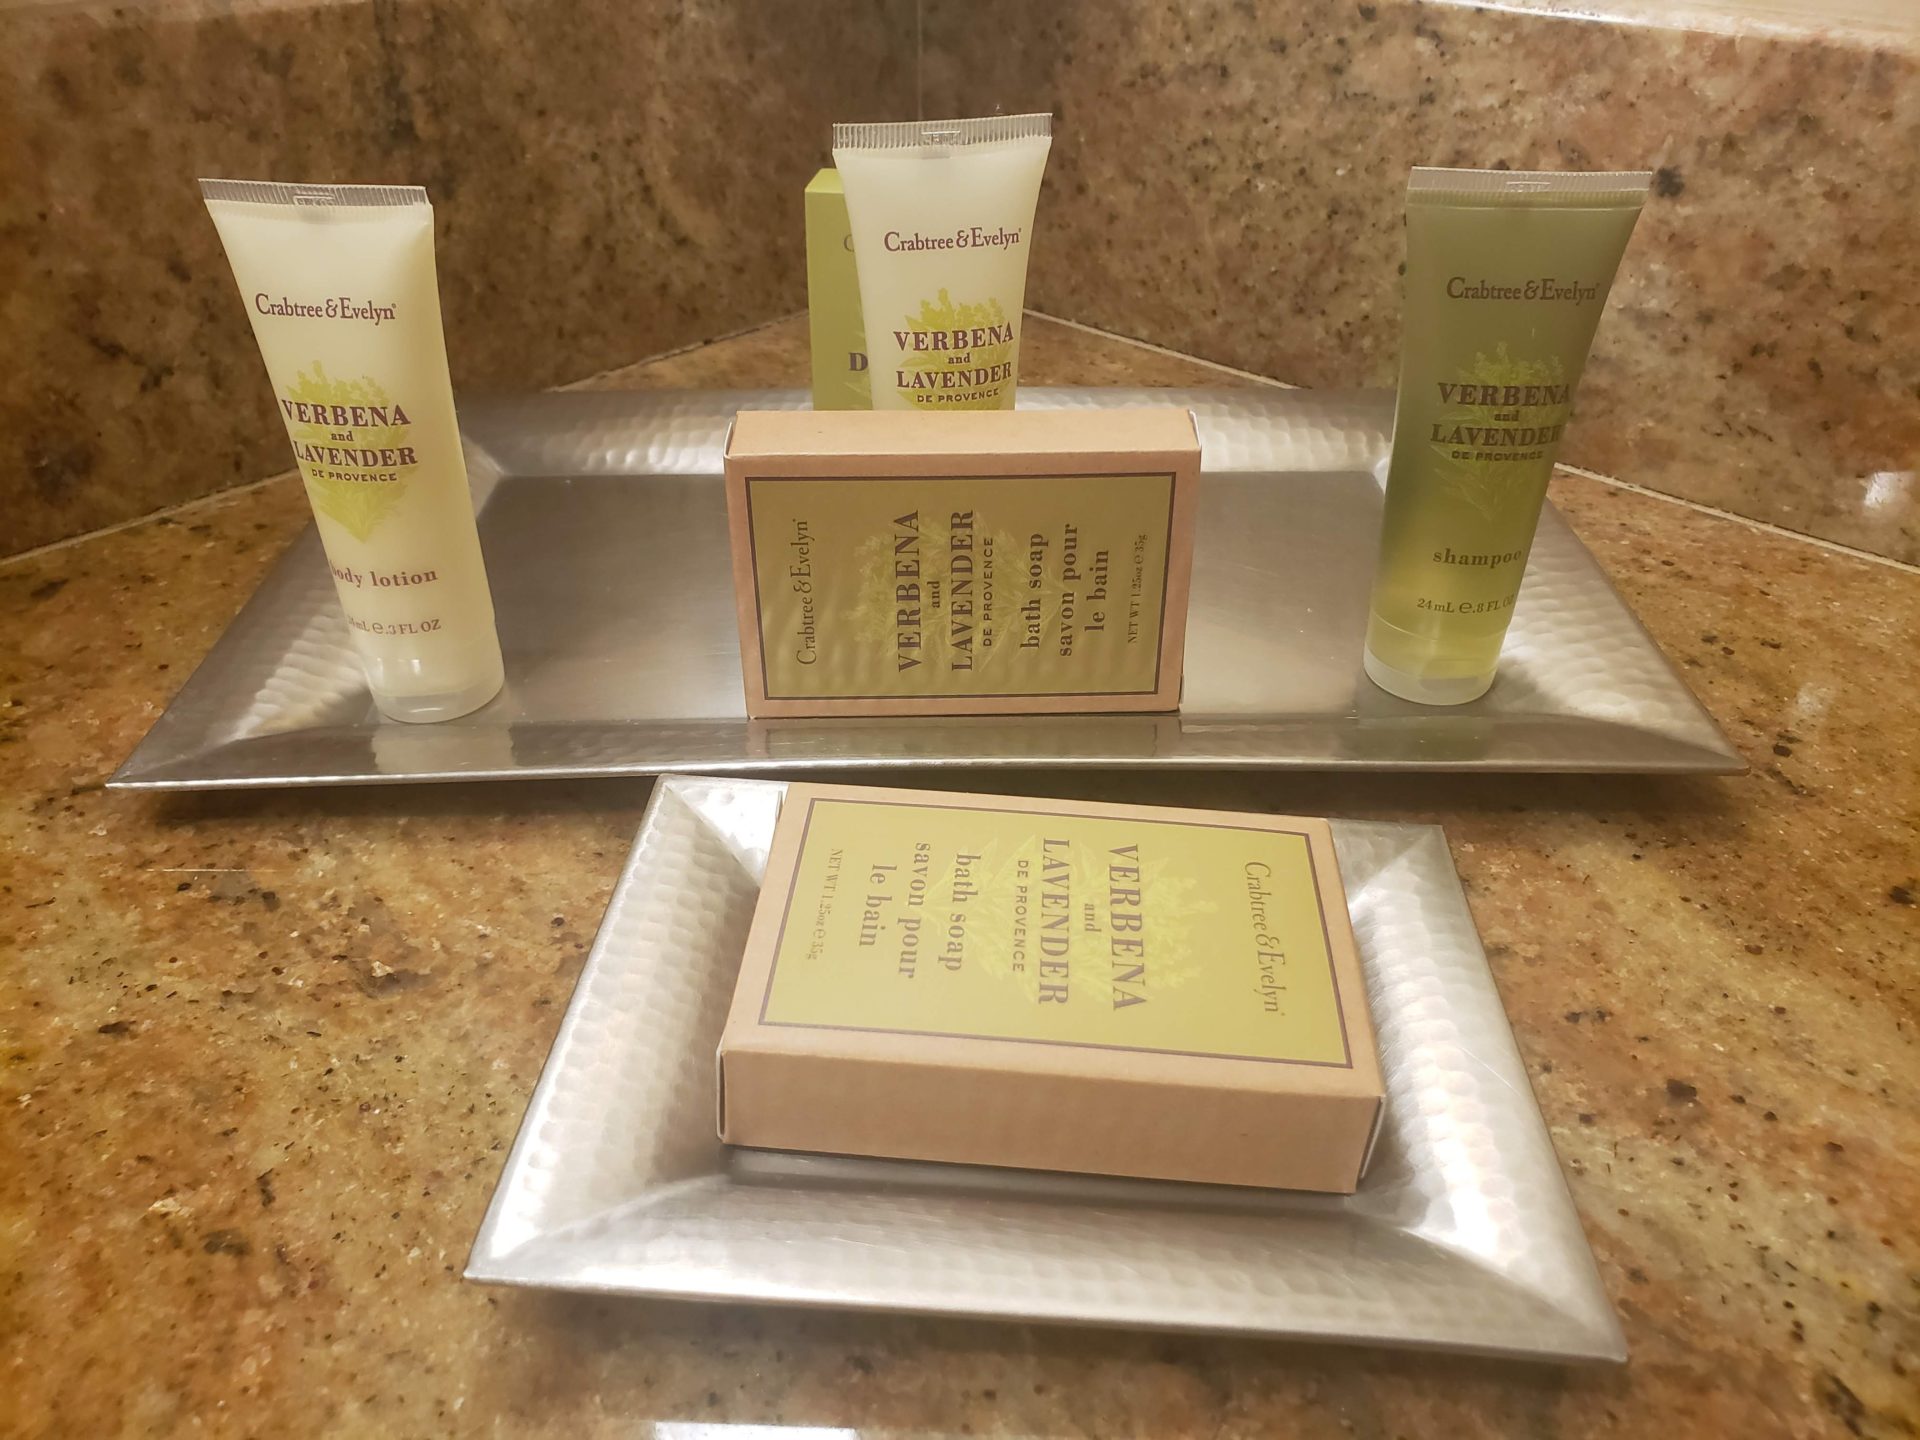 a group of bottles of body care products on a tray